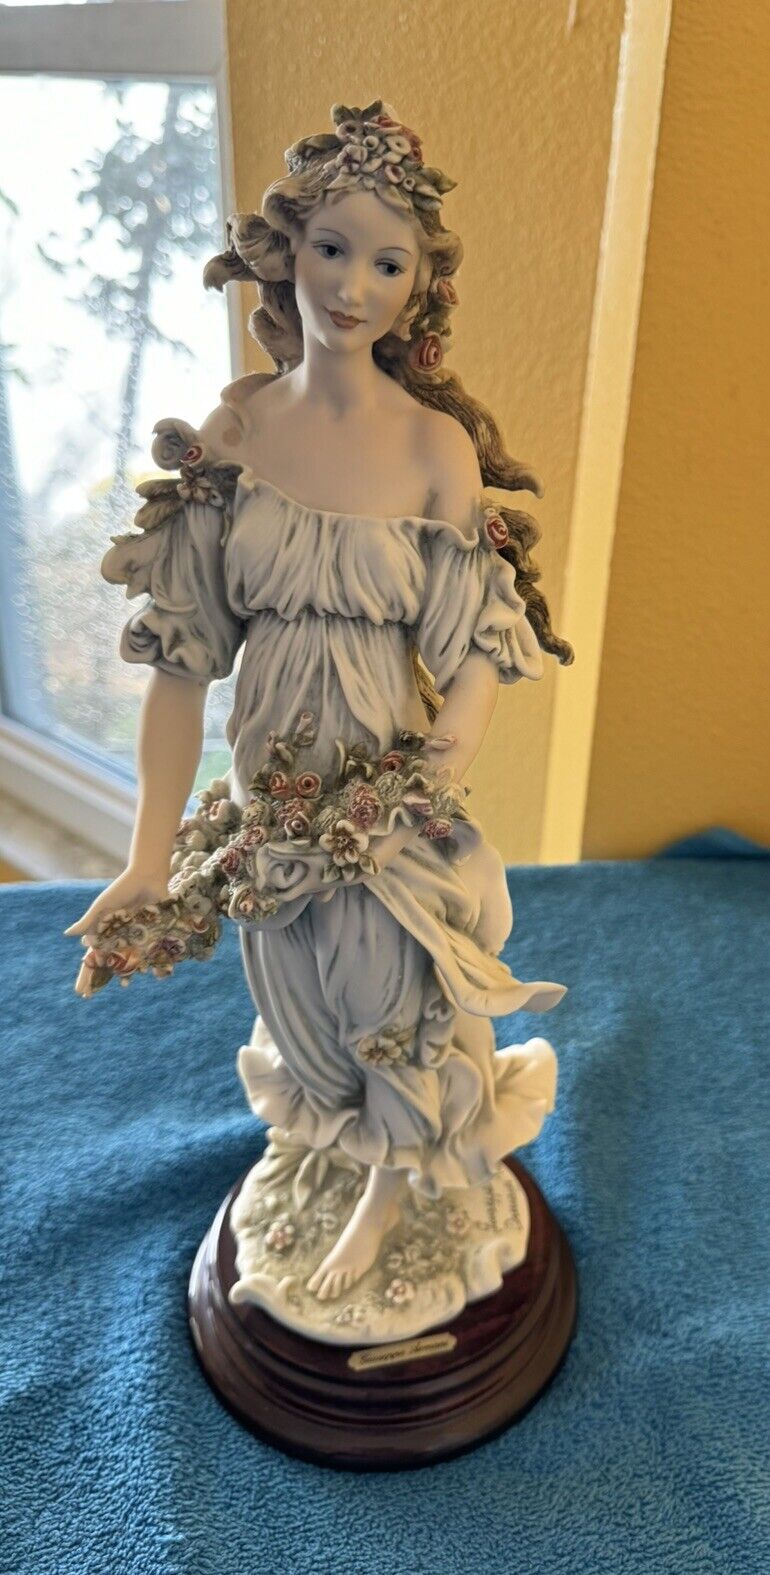 GIUSEPPE Armani Florence~FLORA~WOMAN w/Flowers 15” Statue~1994 COLLECTOR SOCIETY